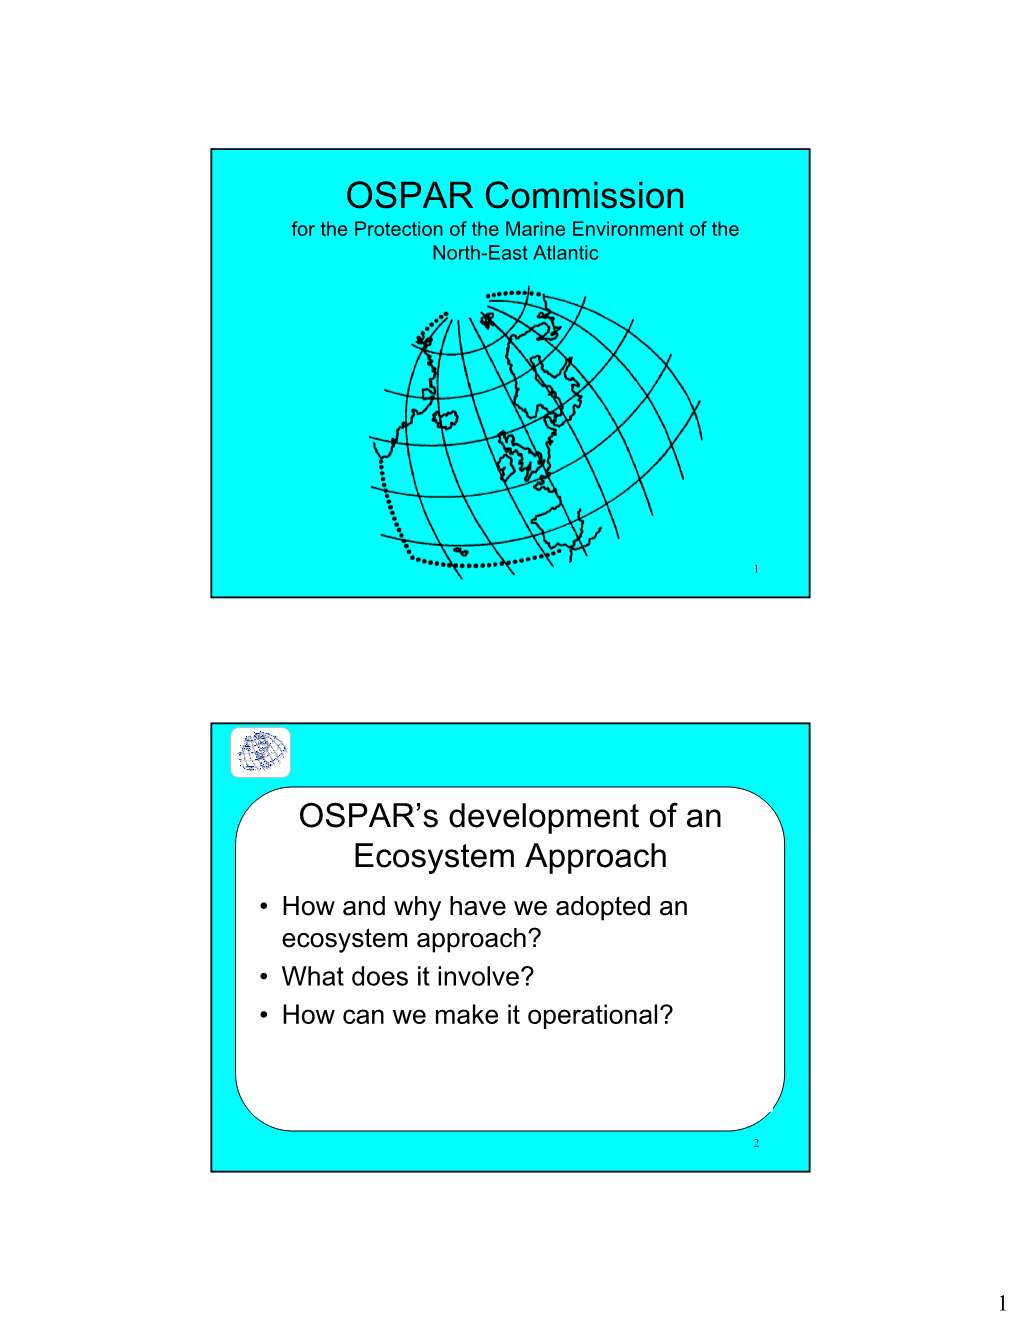 OSPAR Commission for the Protection of the Marine Environment of the North-East Atlantic